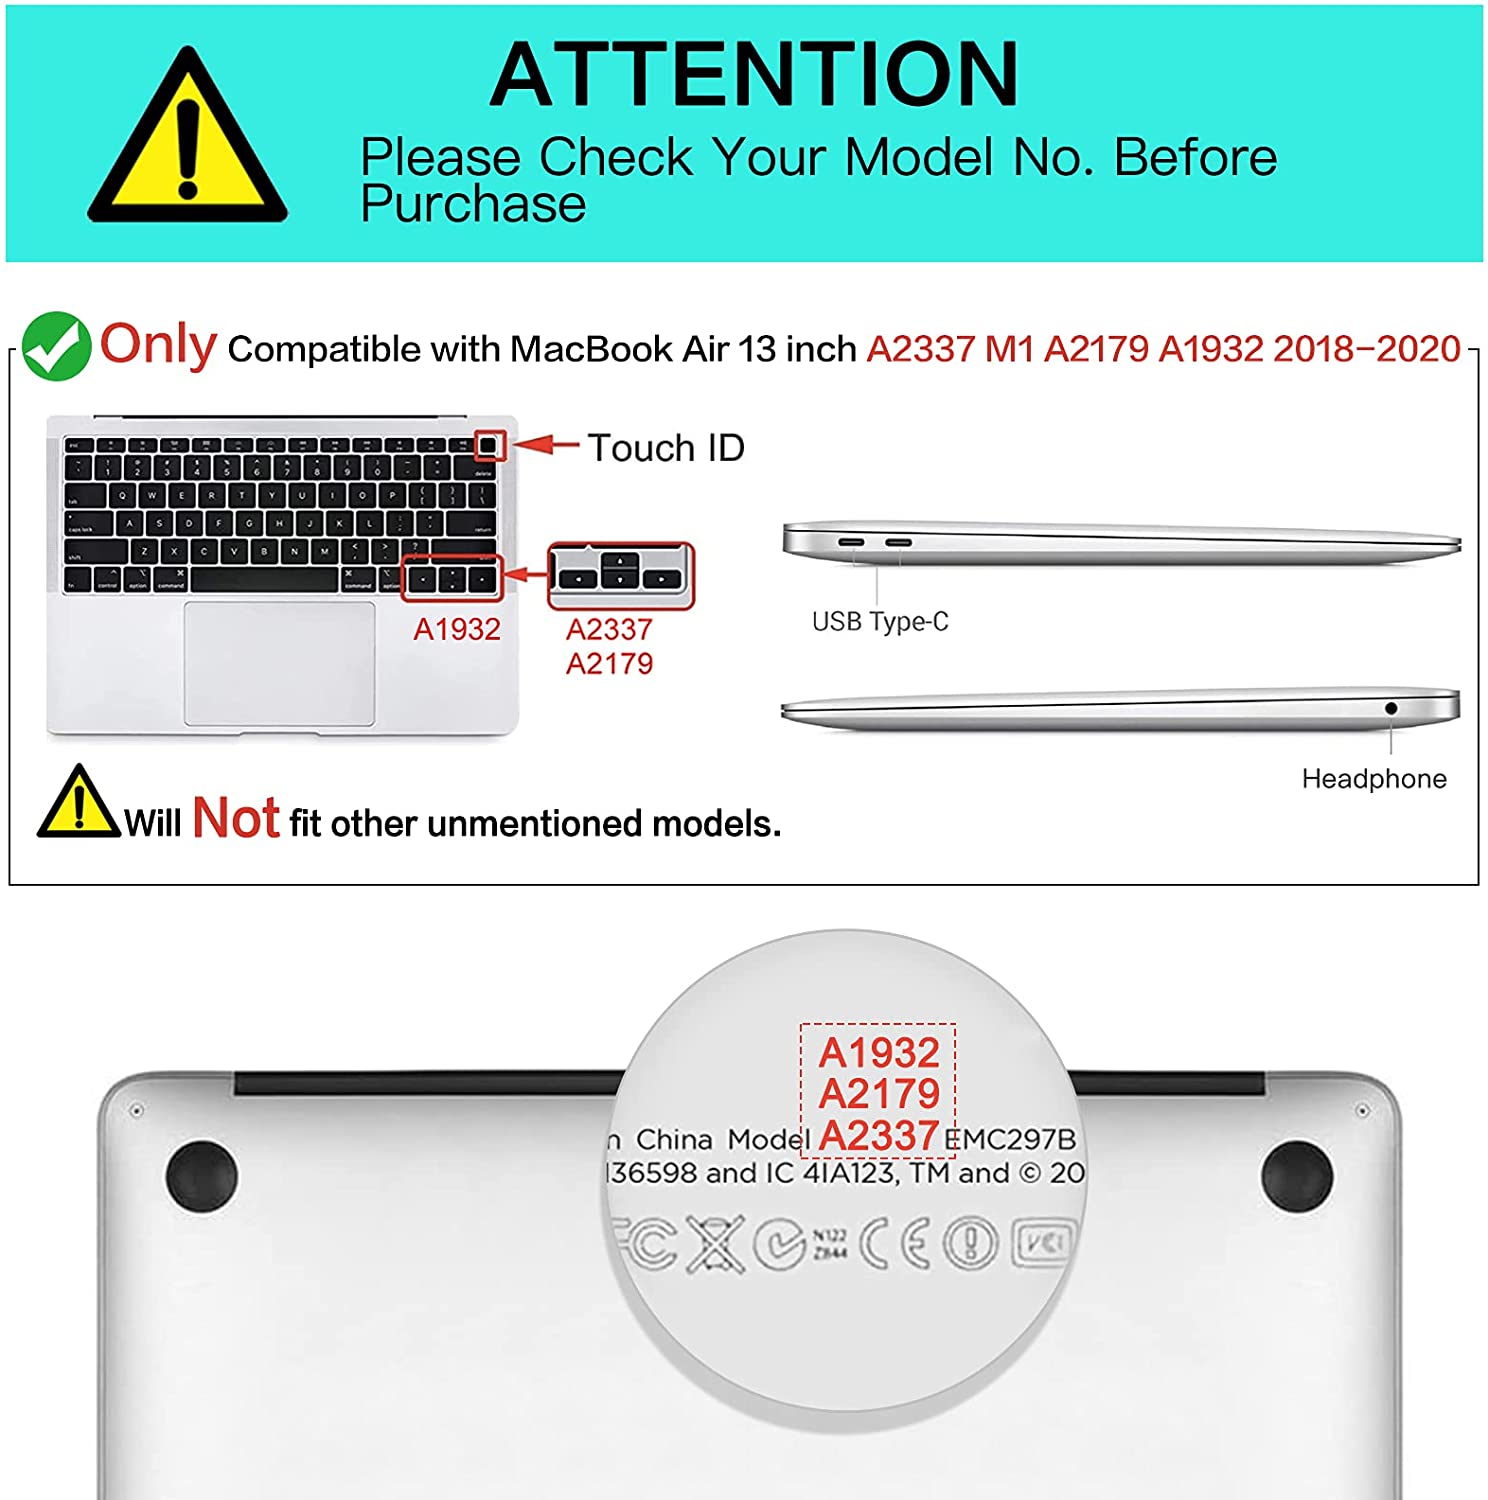 MOSISO 5 in 1 New MacBook Air 13 inch Case A1932 2019 2018 Release, Hard Case Shell Cover&Sleeve Bag for Apple MacBook Air 13'' with Retina Display